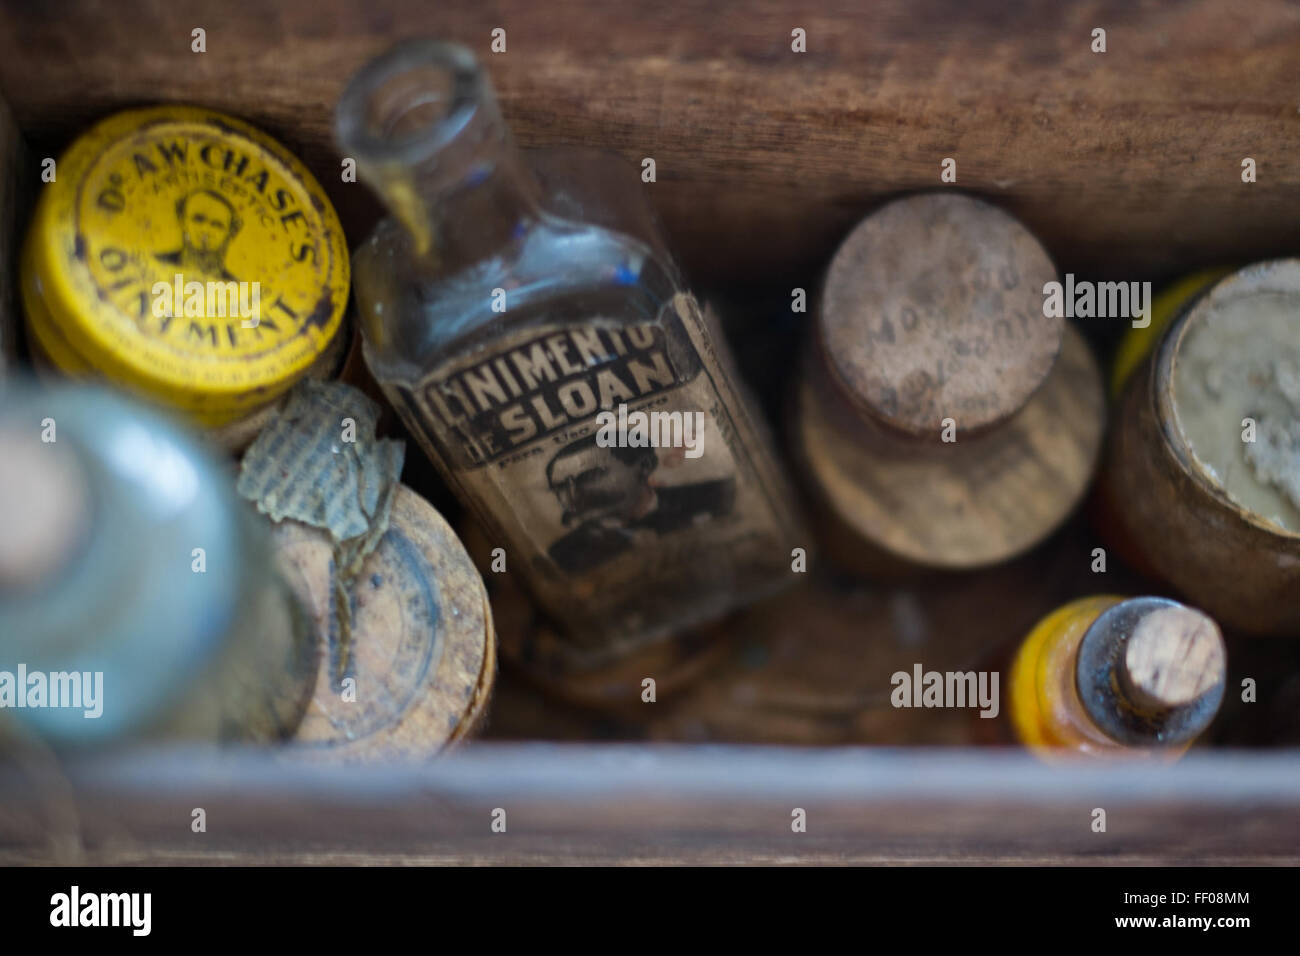 Vintage Bottles and Containers Vintage Bottles and Container Stock Photo